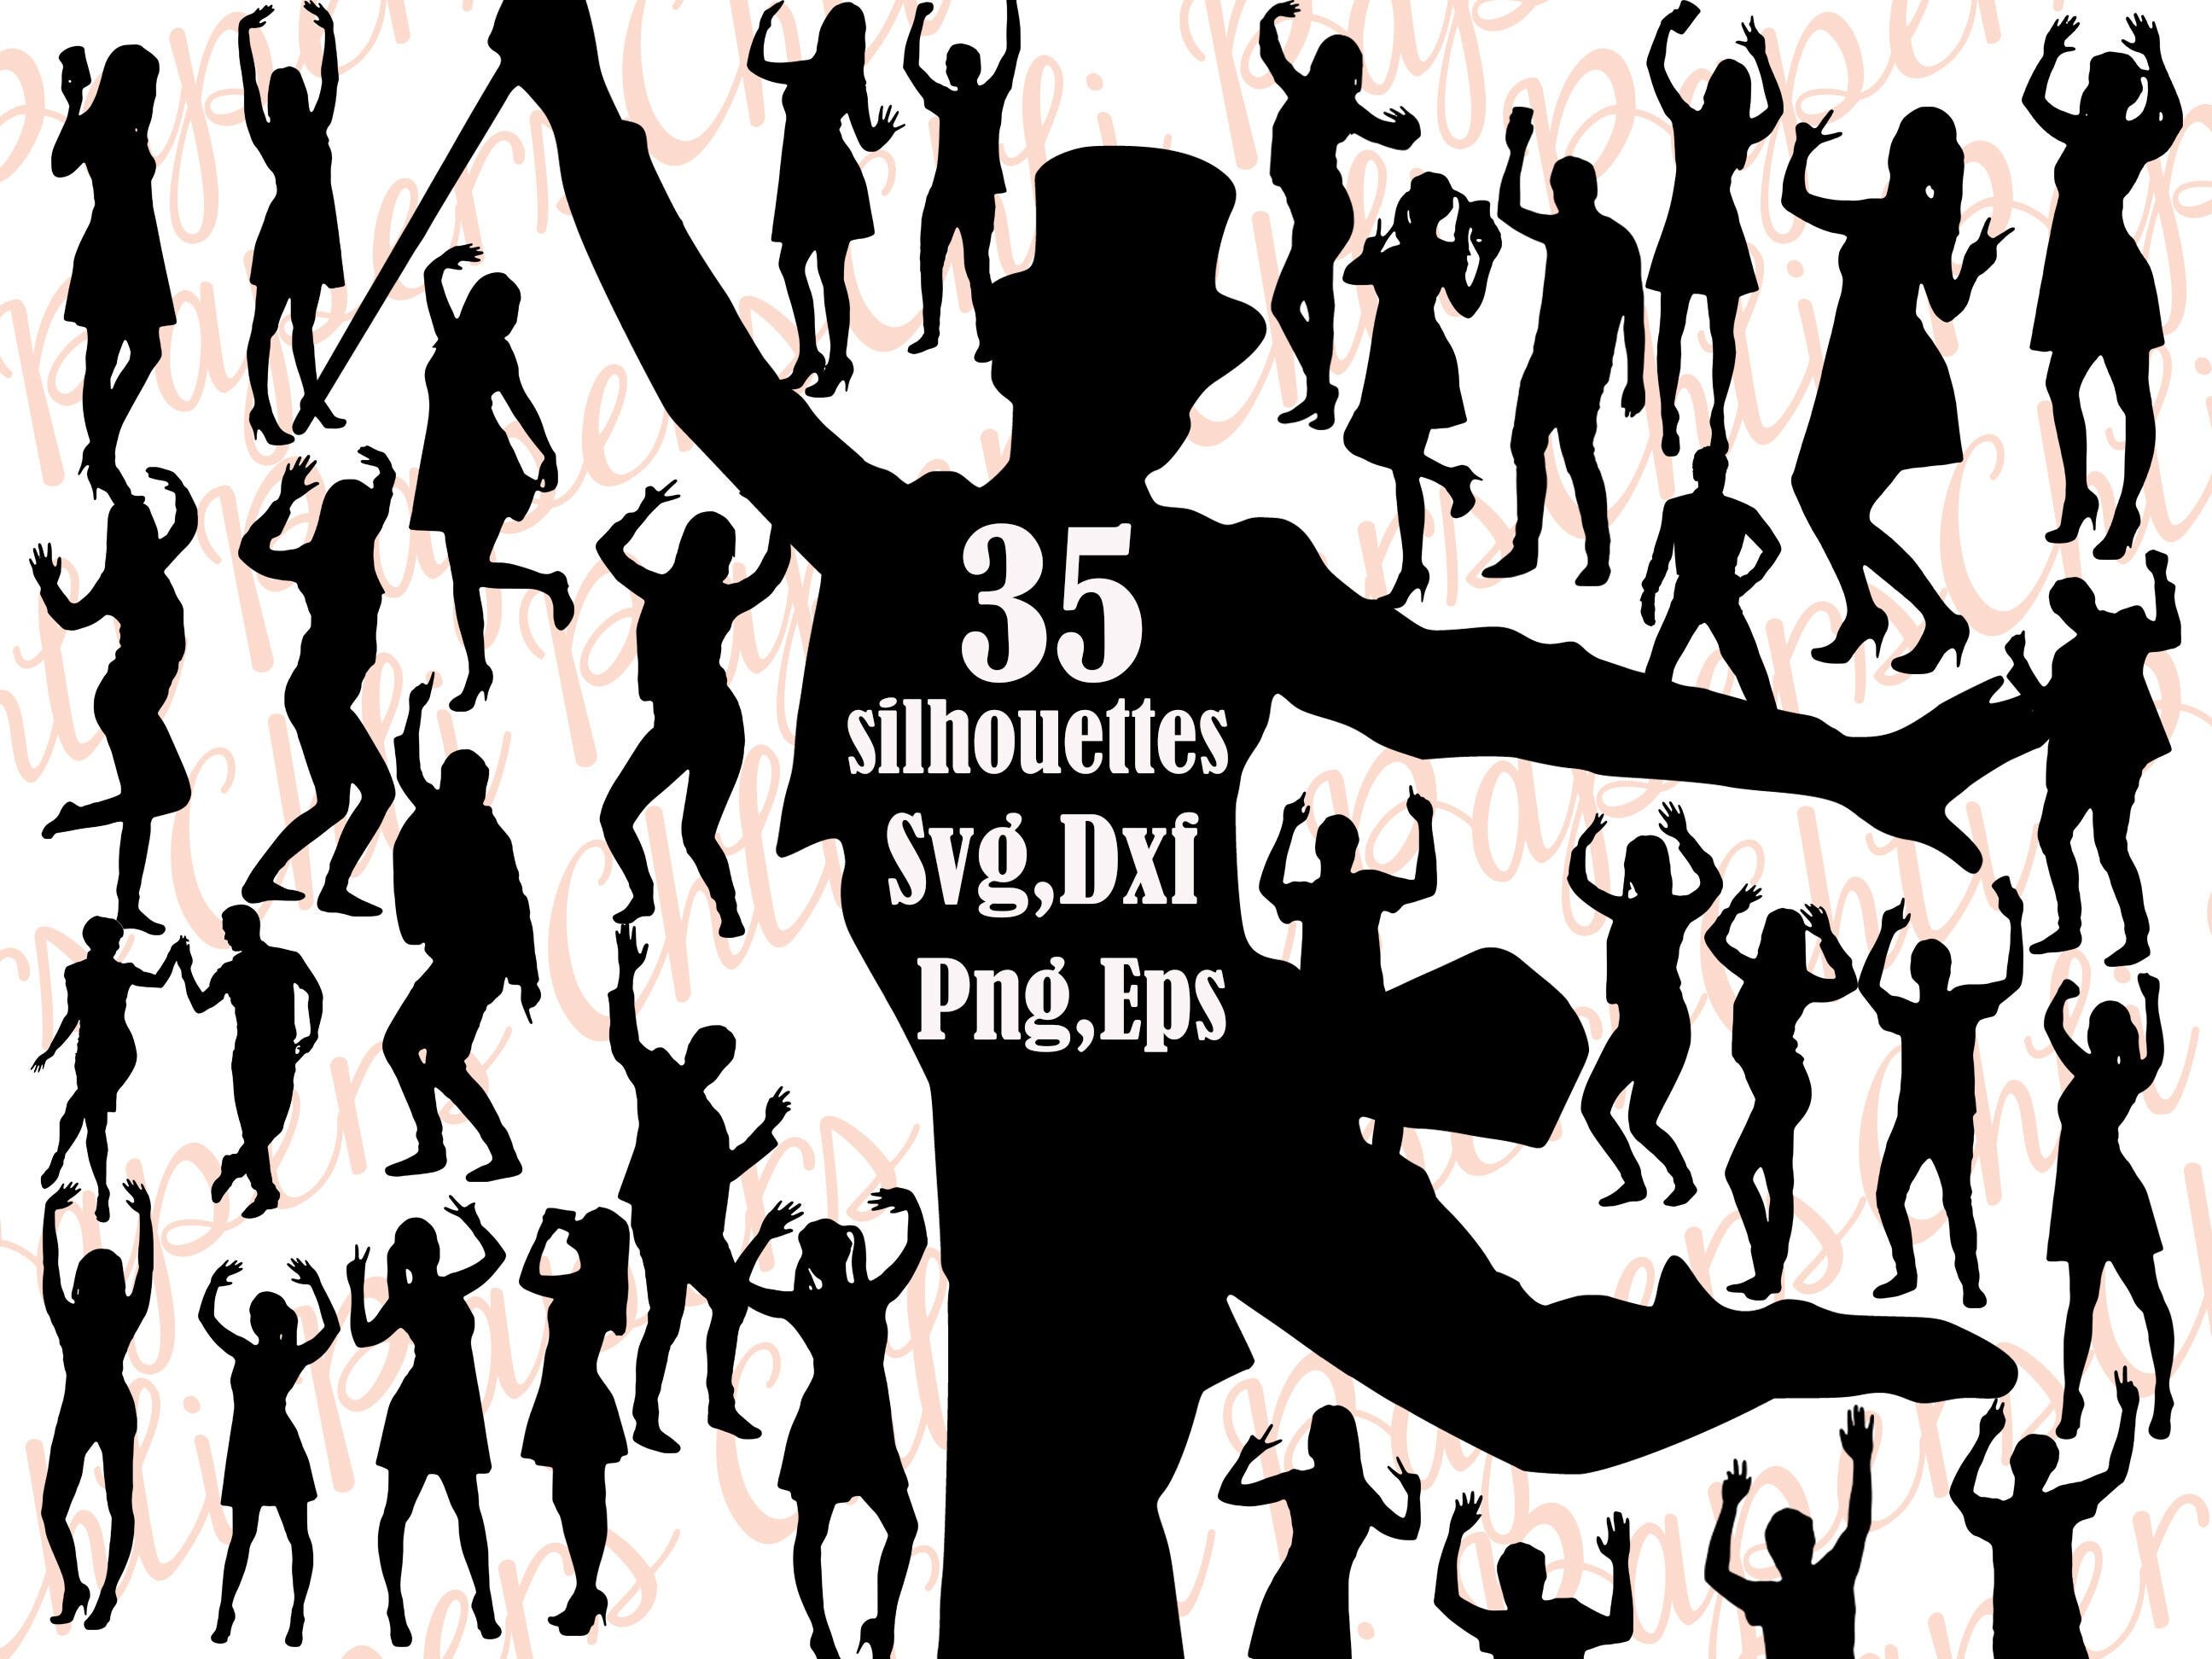 Dancing Silhouettes Svg: "DANCING CLIPART" Dancing People Svg,Dancer Clipart,Dancer cut files,Dancer Silhouettes,Cricut Svg,Dancing cut file